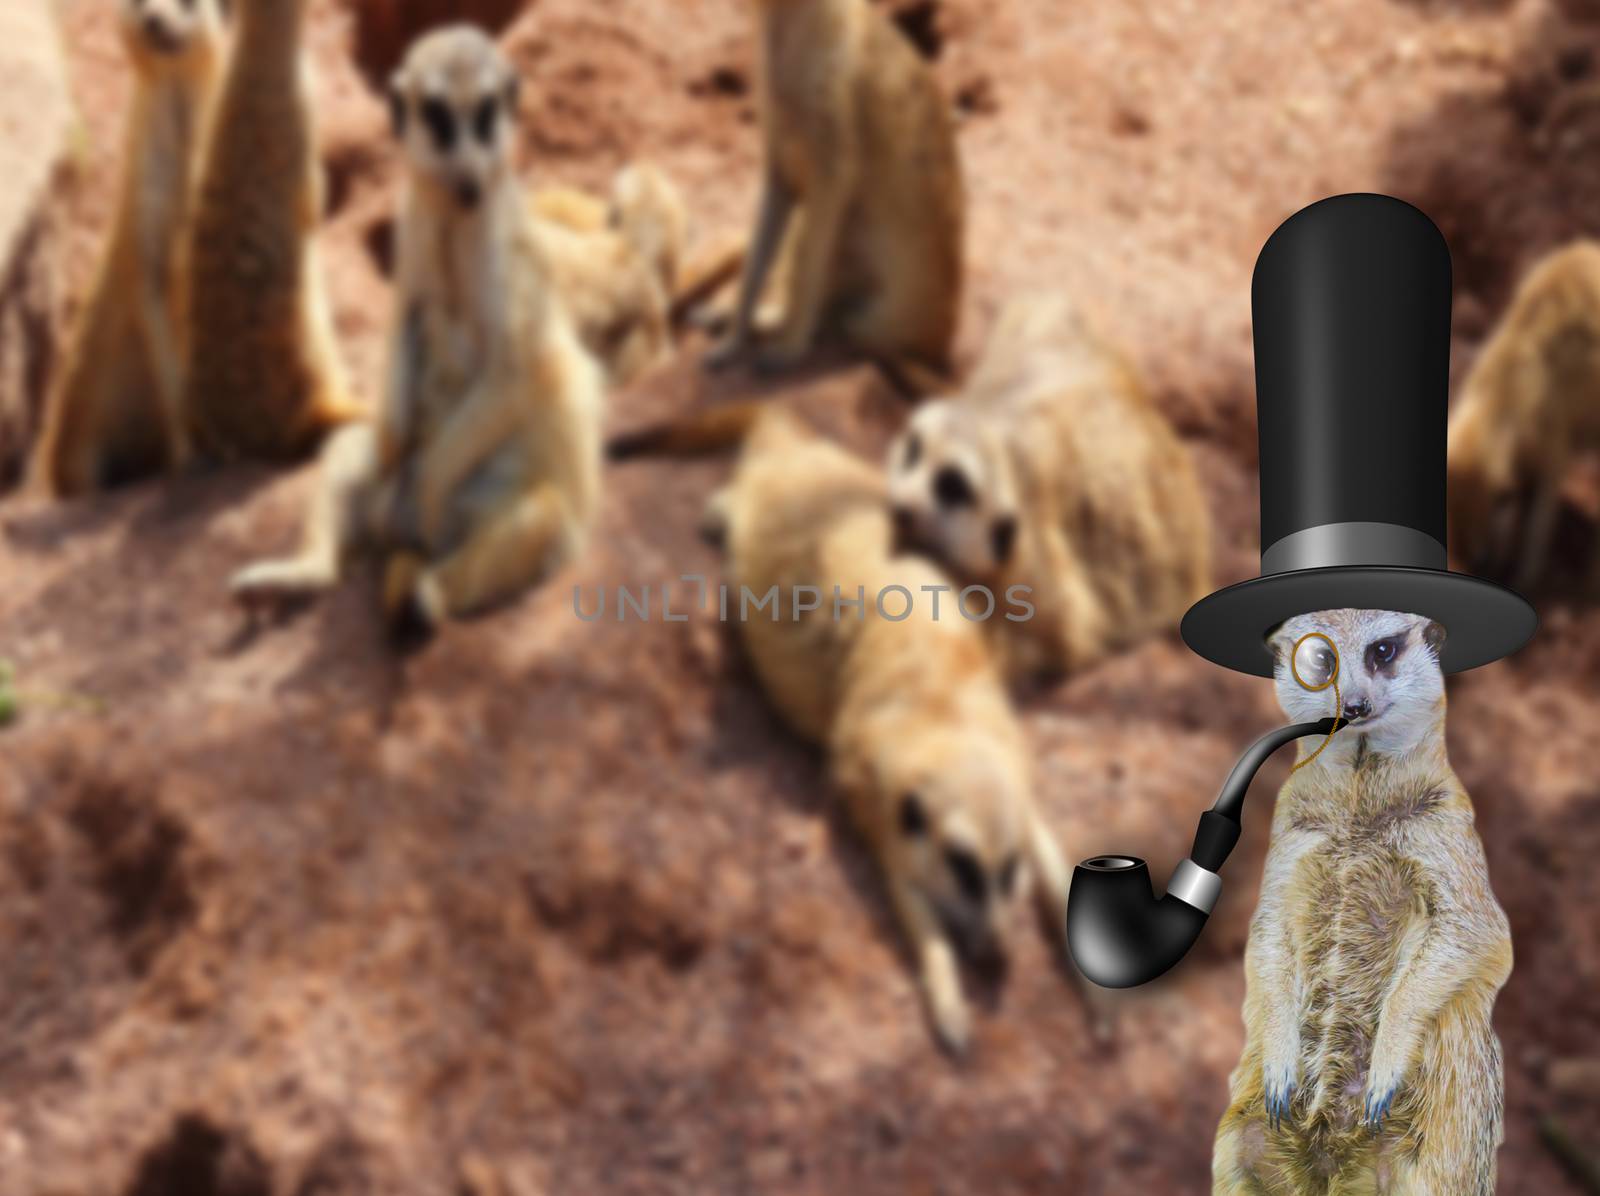 the odd one out a old english posh gentlemen meerkat wearing a top hat standing infront of his normal family